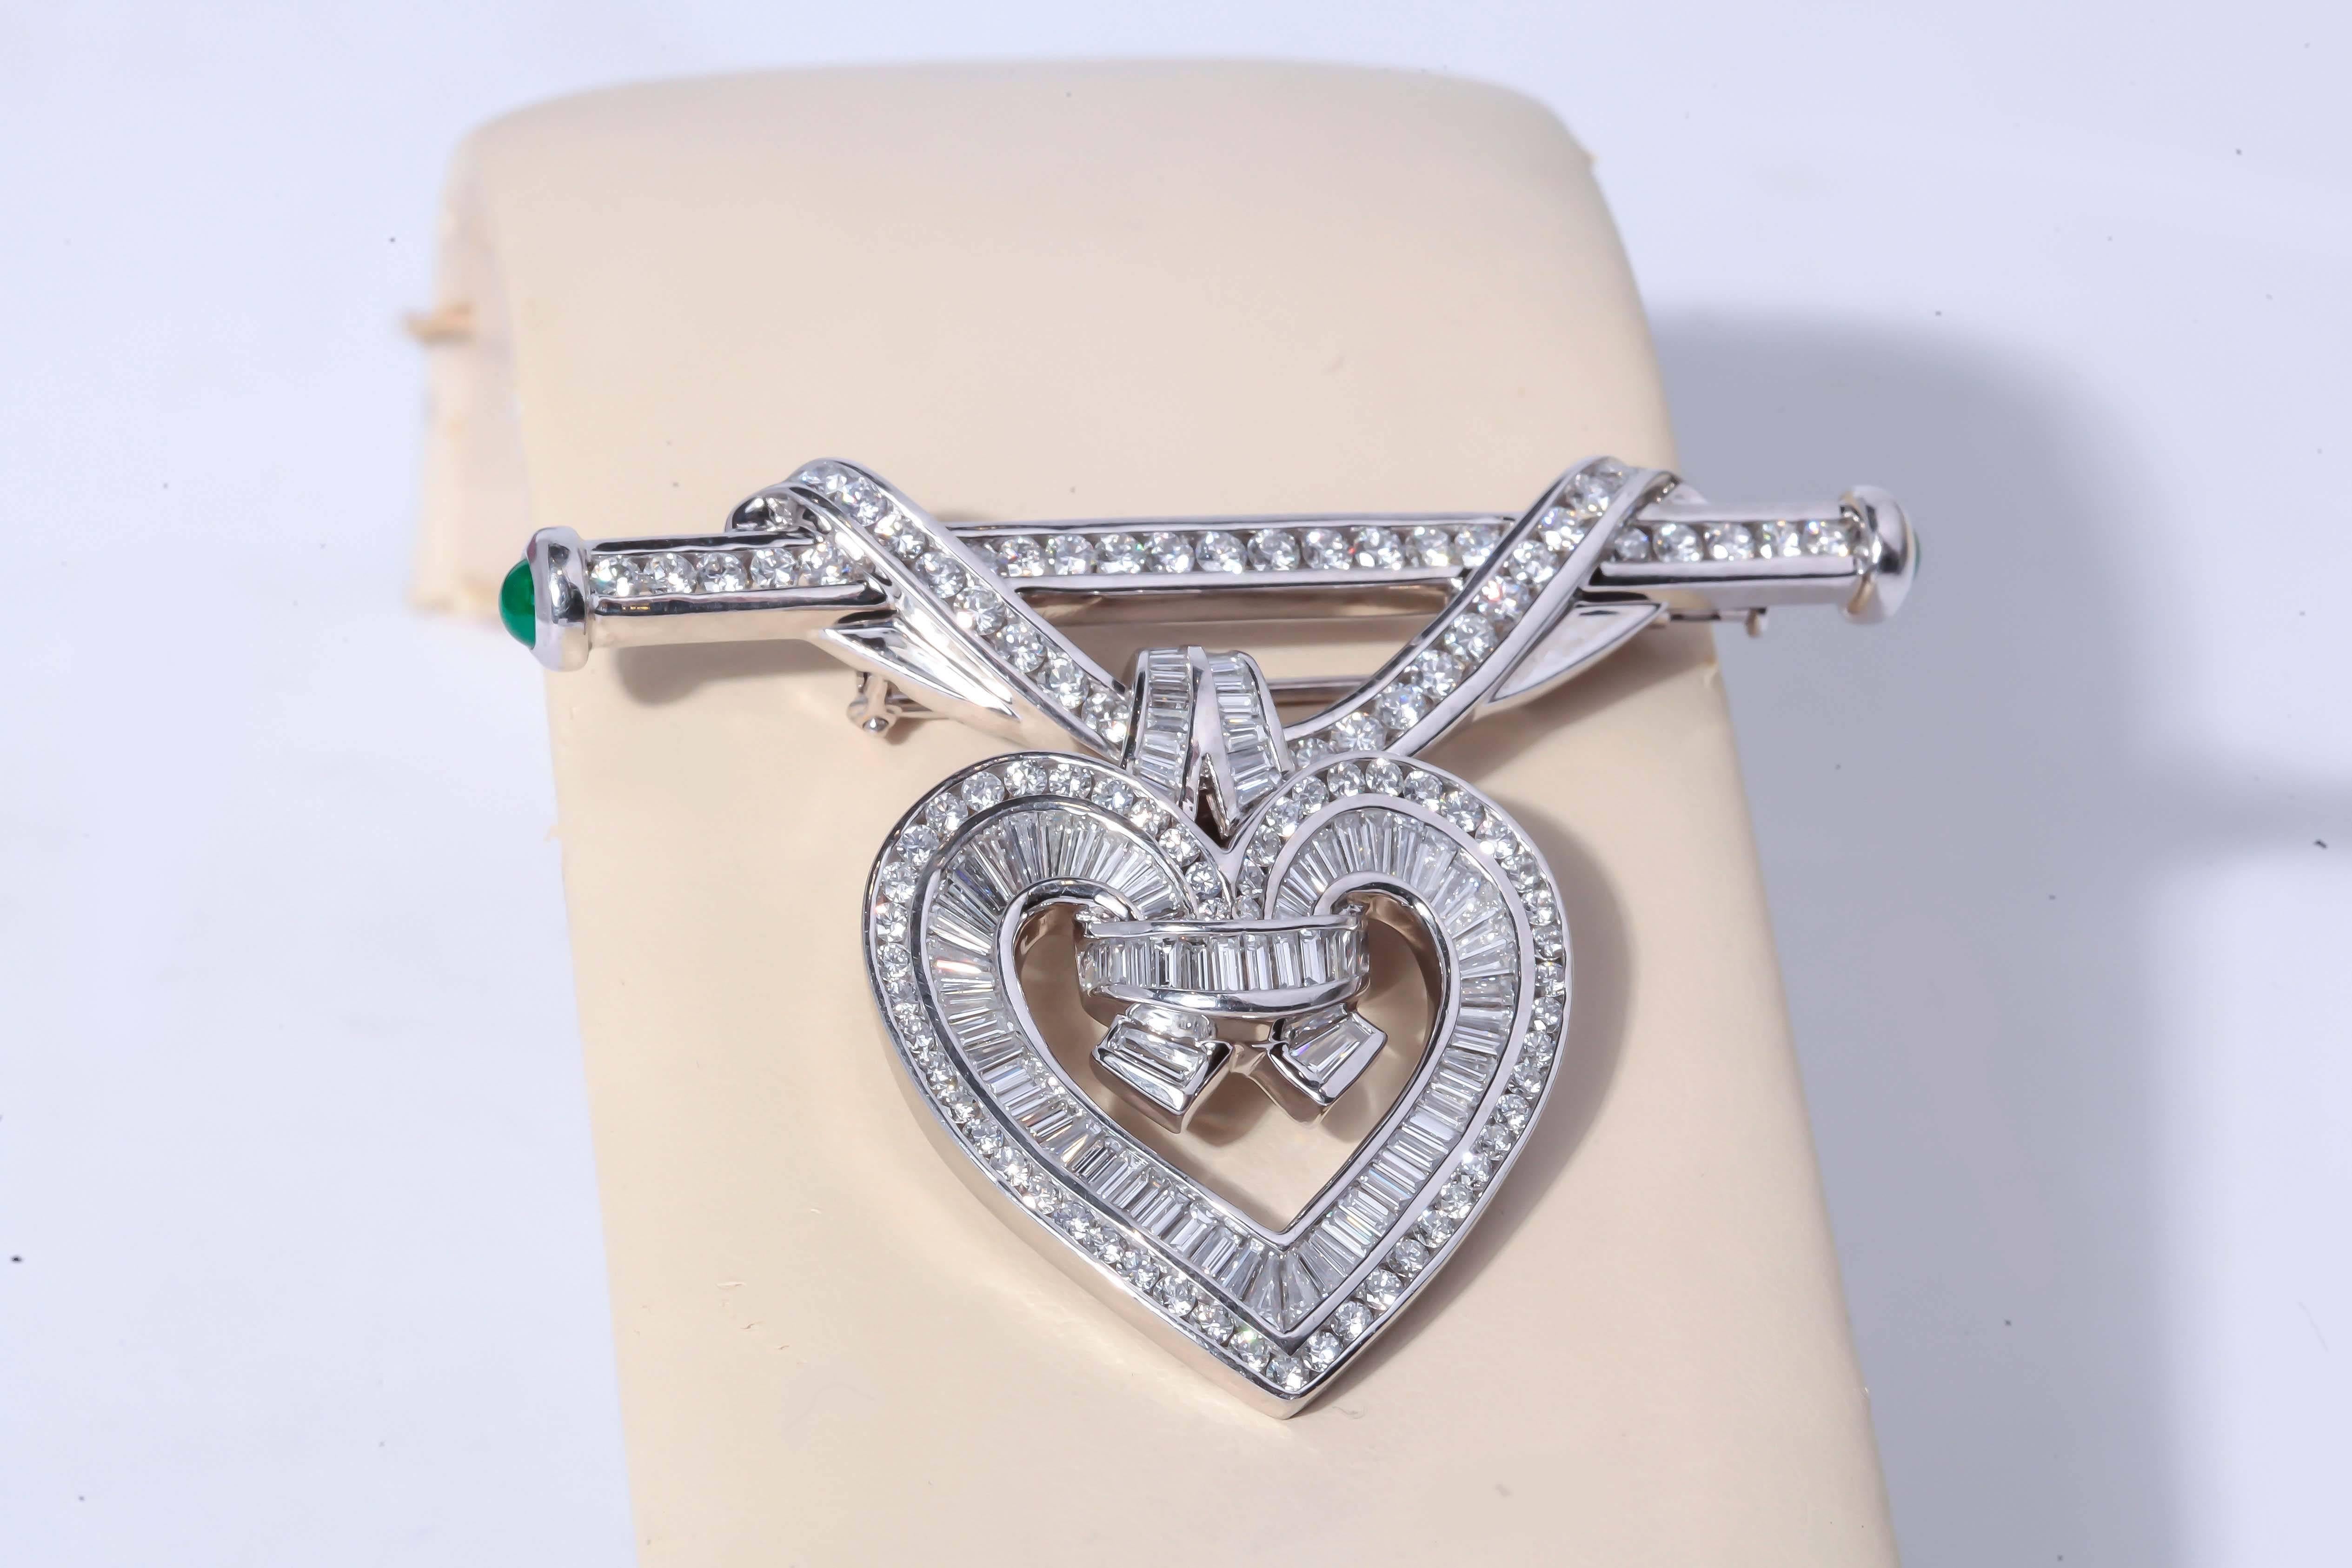 This brooch by Charles Krypell is set with approximately 5.91ct tw, round brilliant cut diamonds and baguette cut. The bar style brooch features a swag motif, and a detachable diamond heart, enhancer style pendant. The bar style brooch is finished